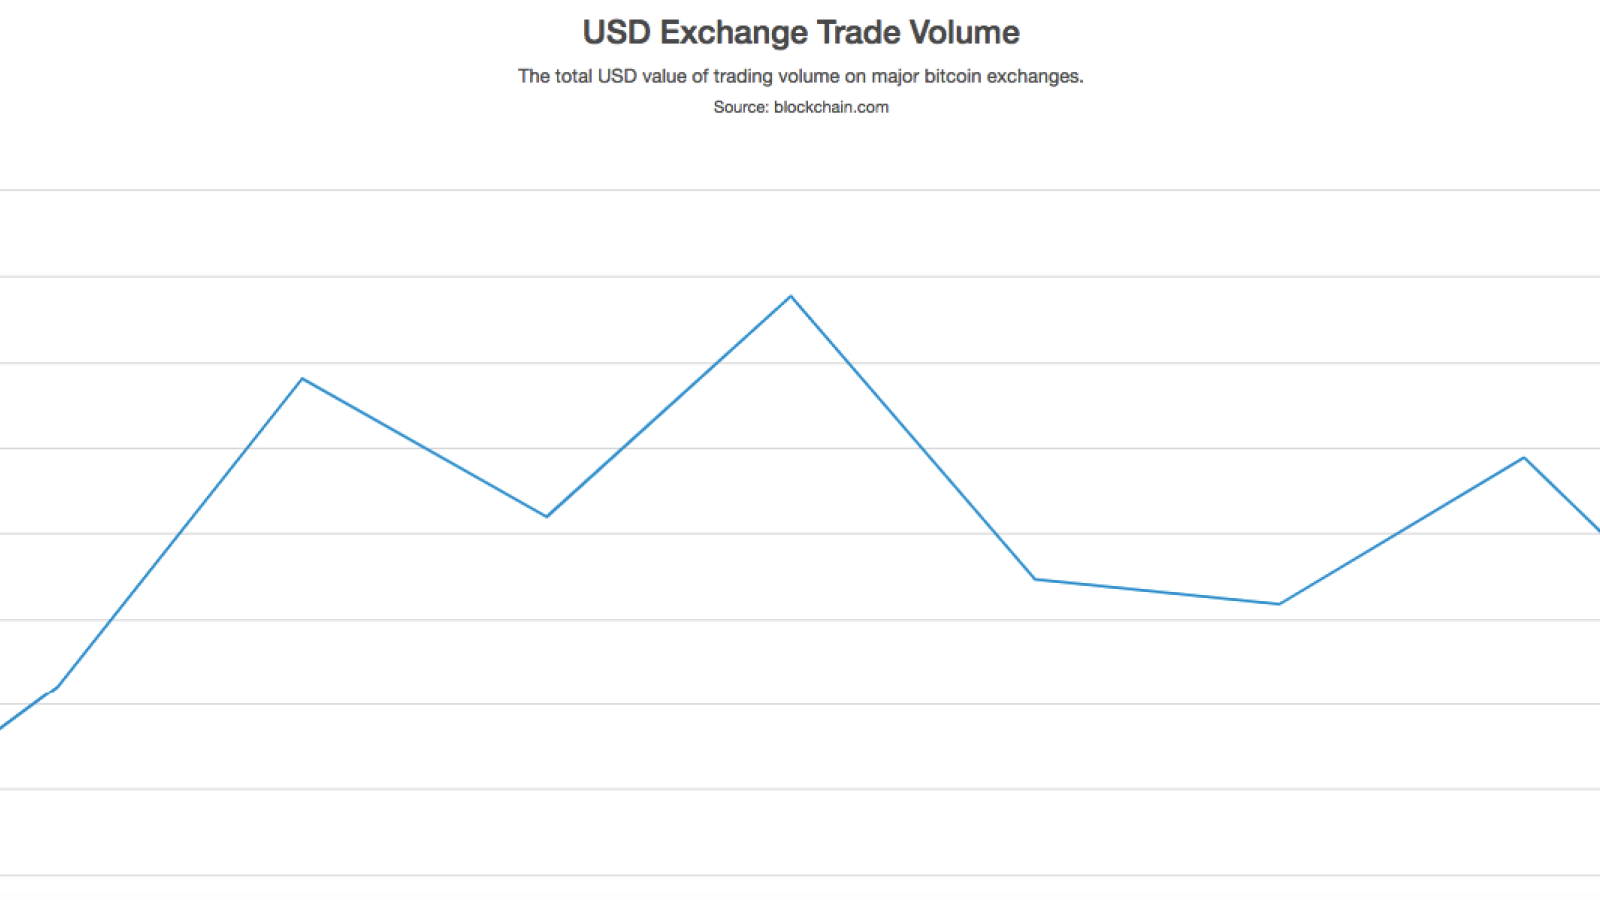 The total USD value of trading volume on major bitcoin exchanges by Blockchain.com